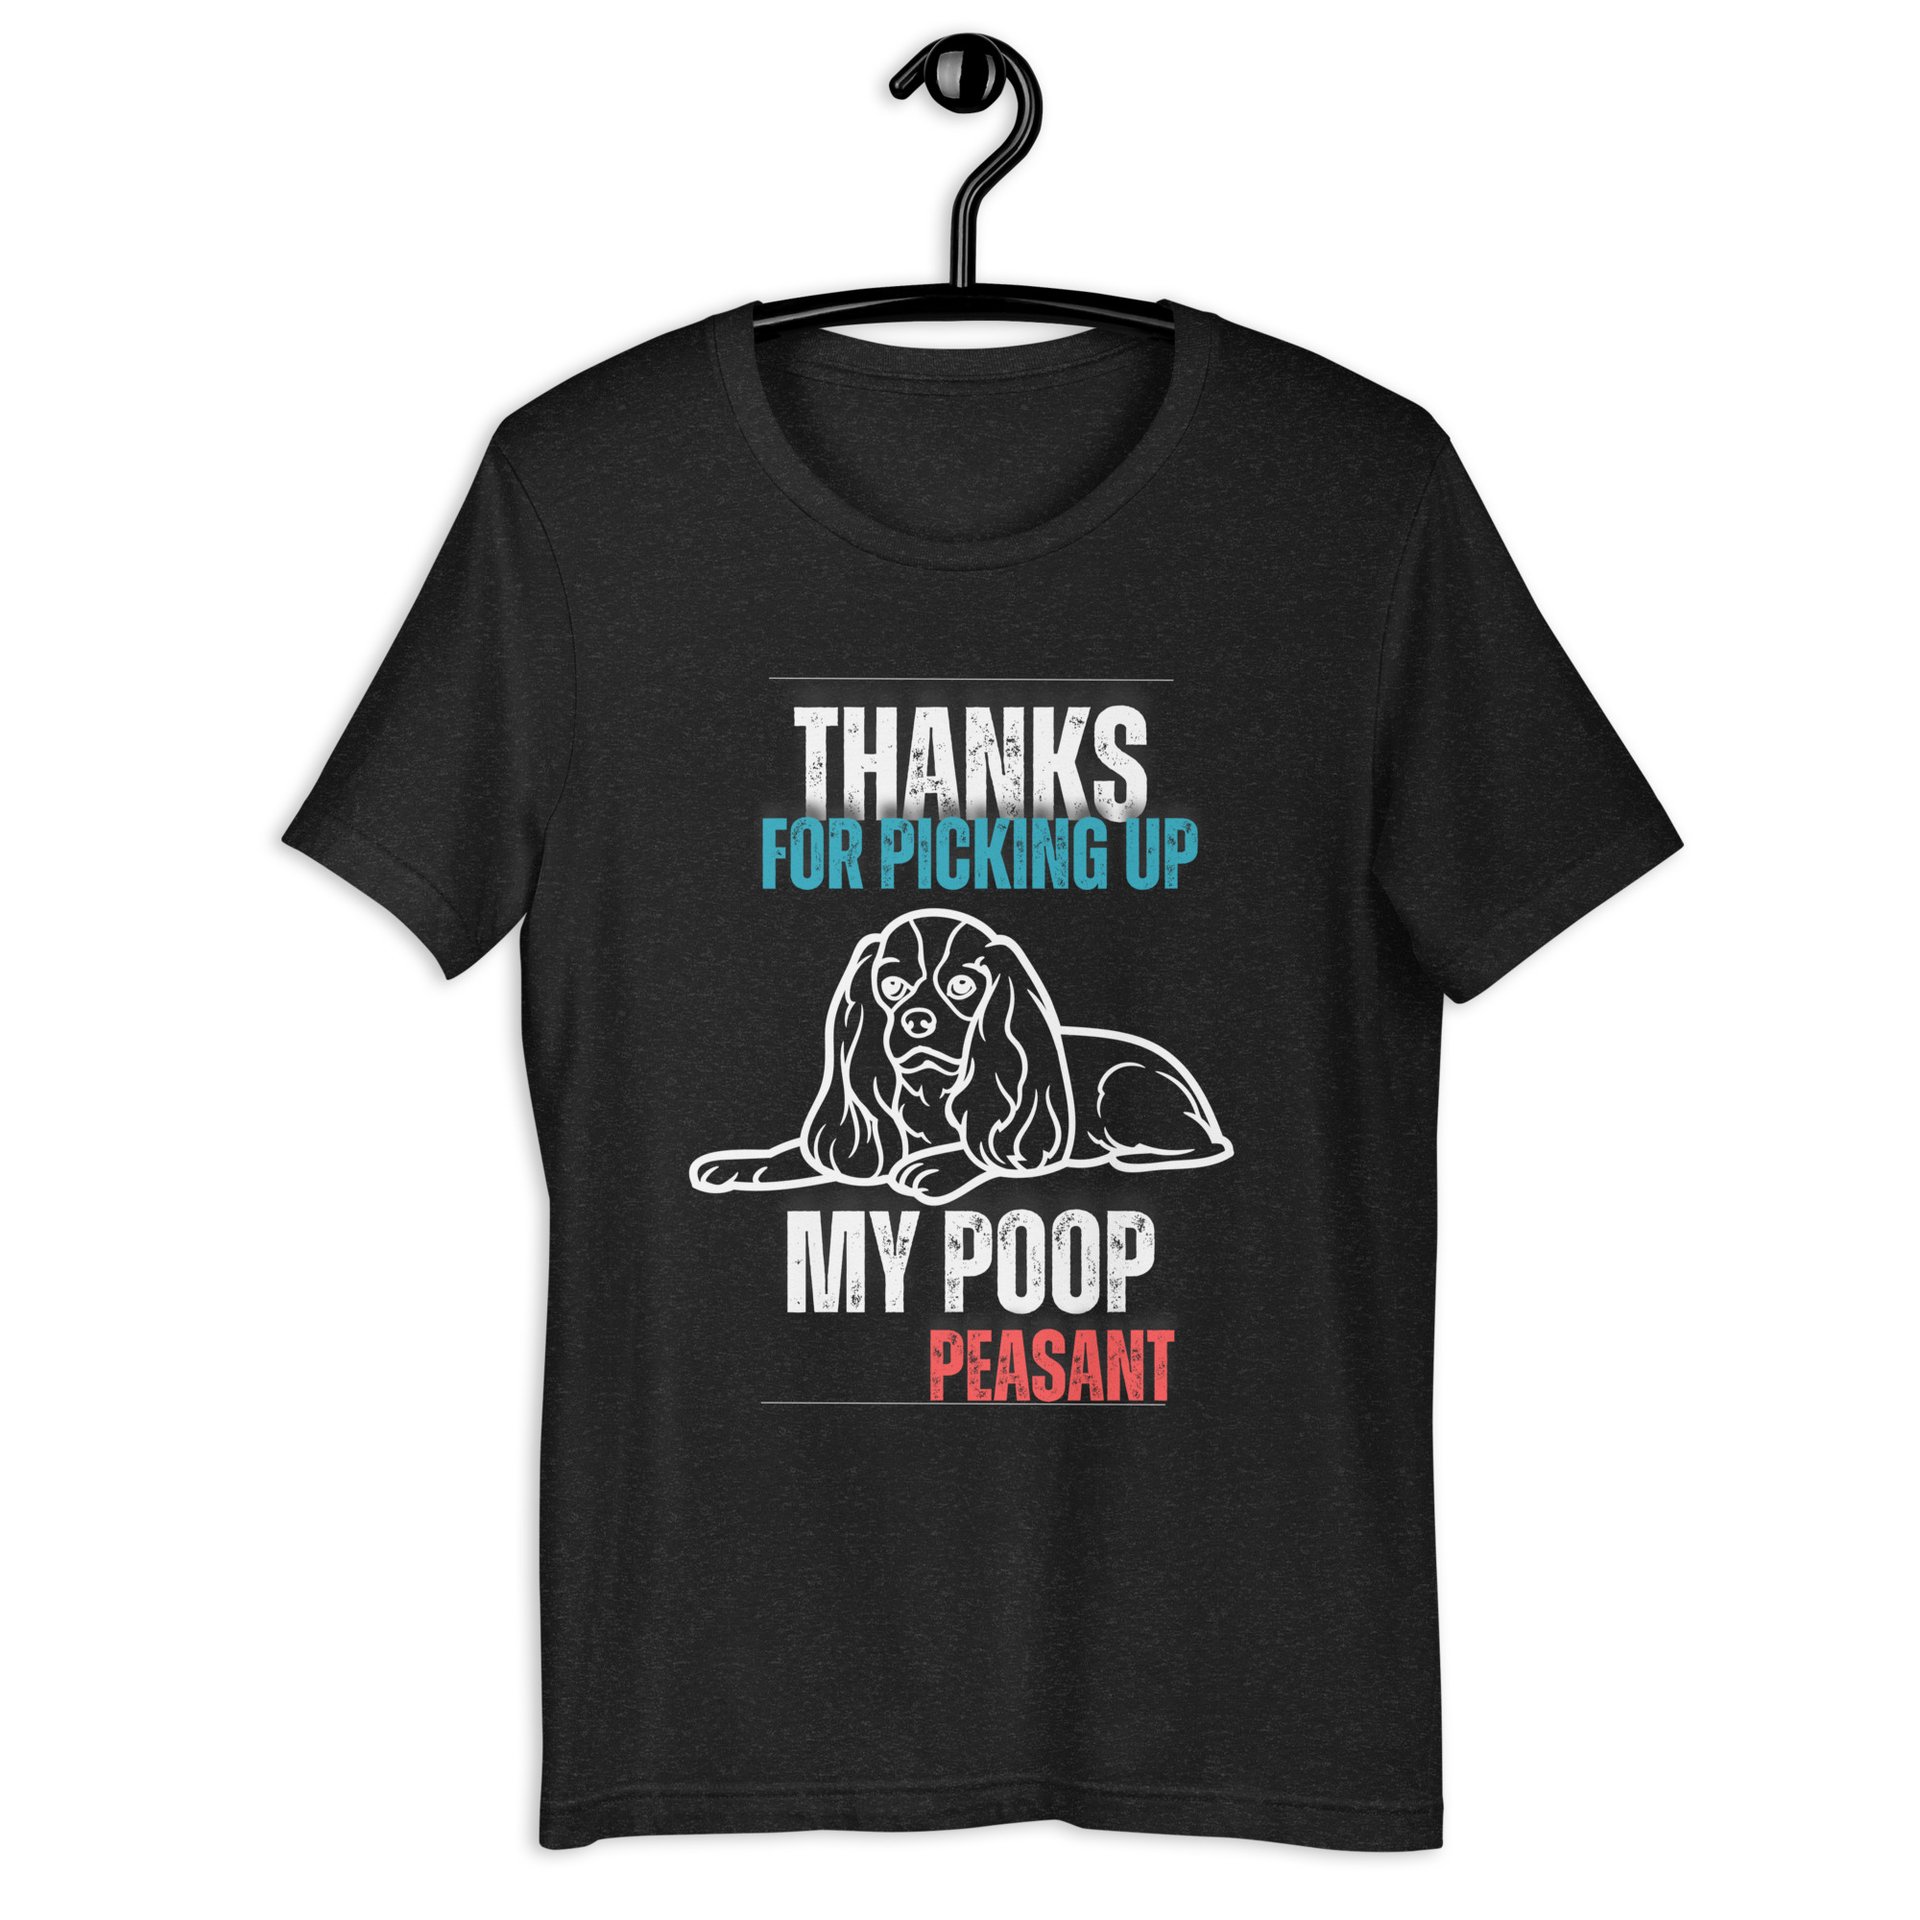 Thanks For Picking Up My POOP Funny Hounds Unisex T-Shirt. Black Heather.